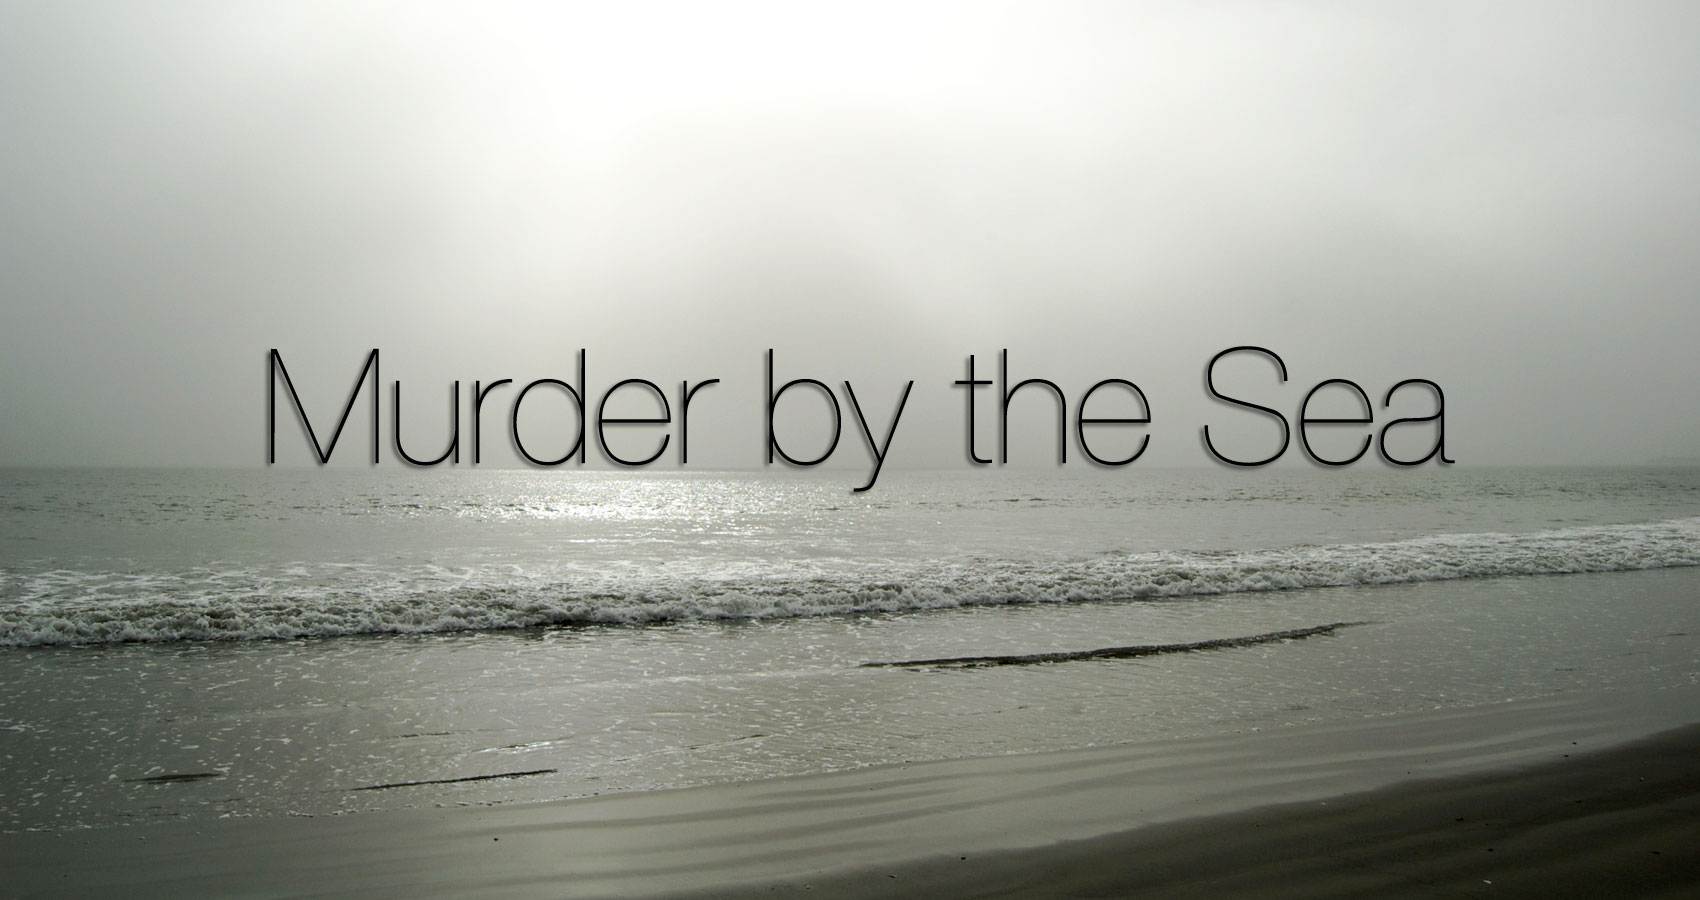 Murder by the Sea by Stanley Wilkin at Spillwords.com